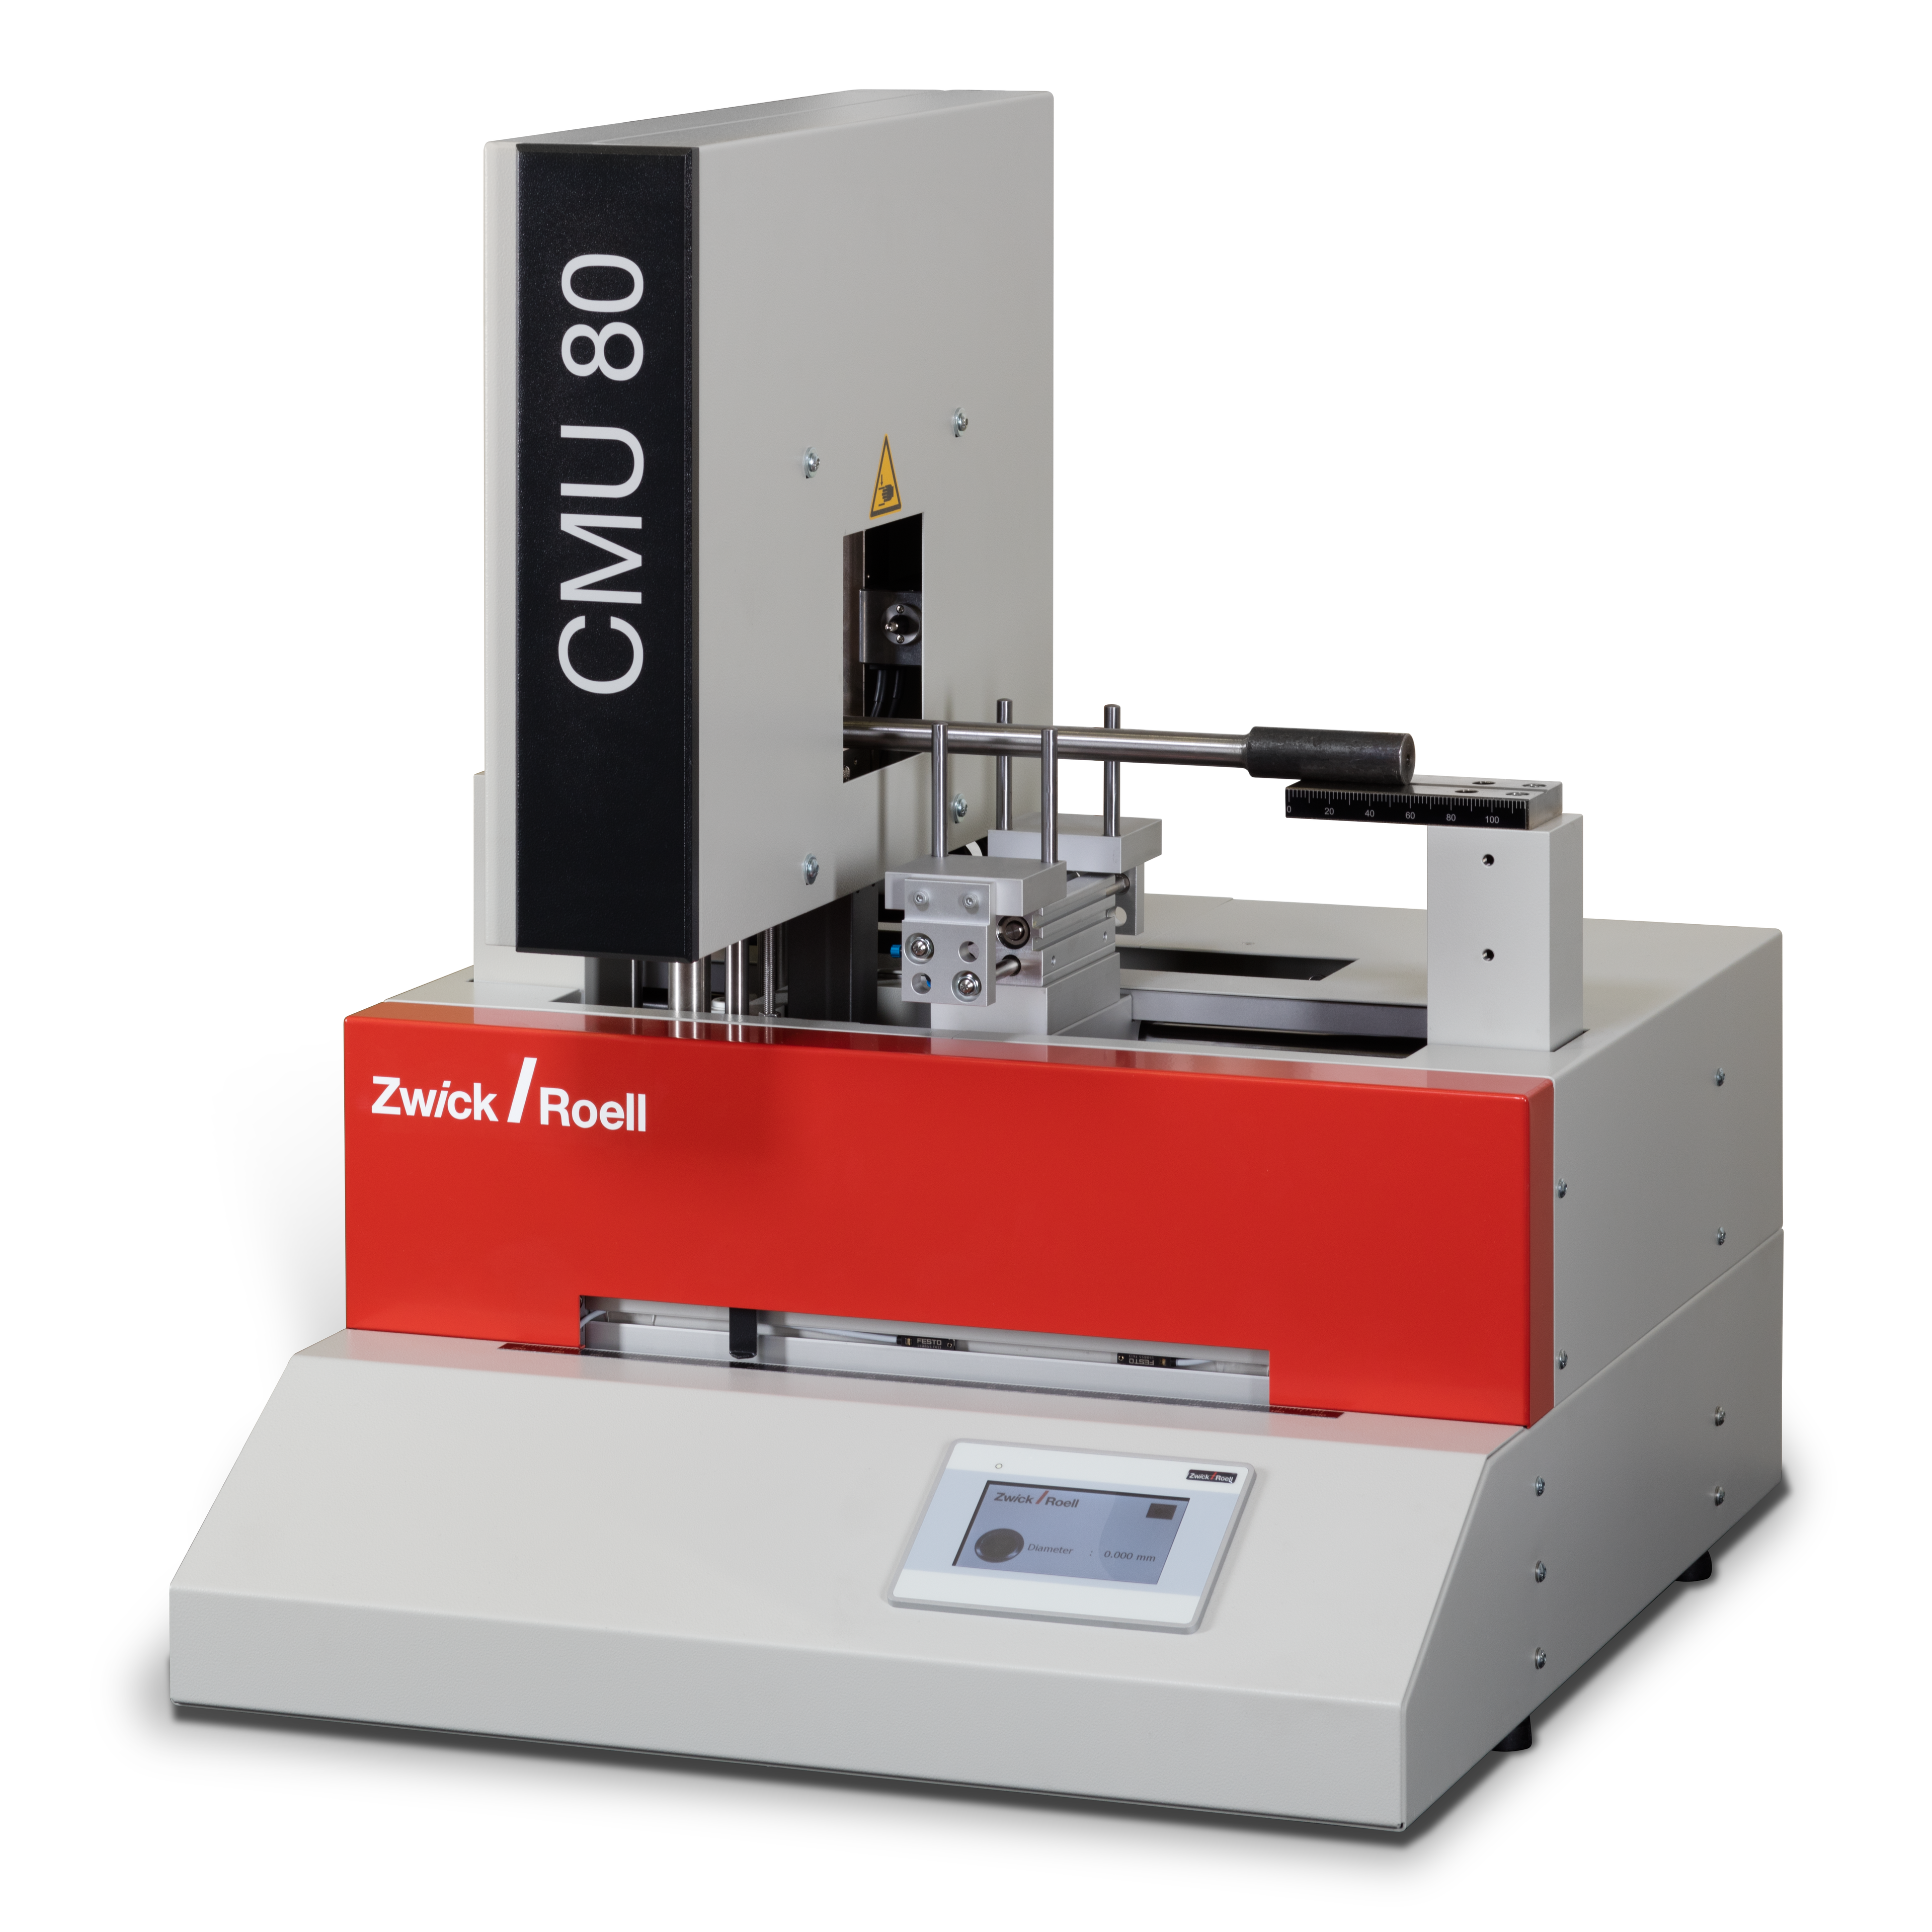 Manual cross-section measuring device for specimen thickness up to 80 mm